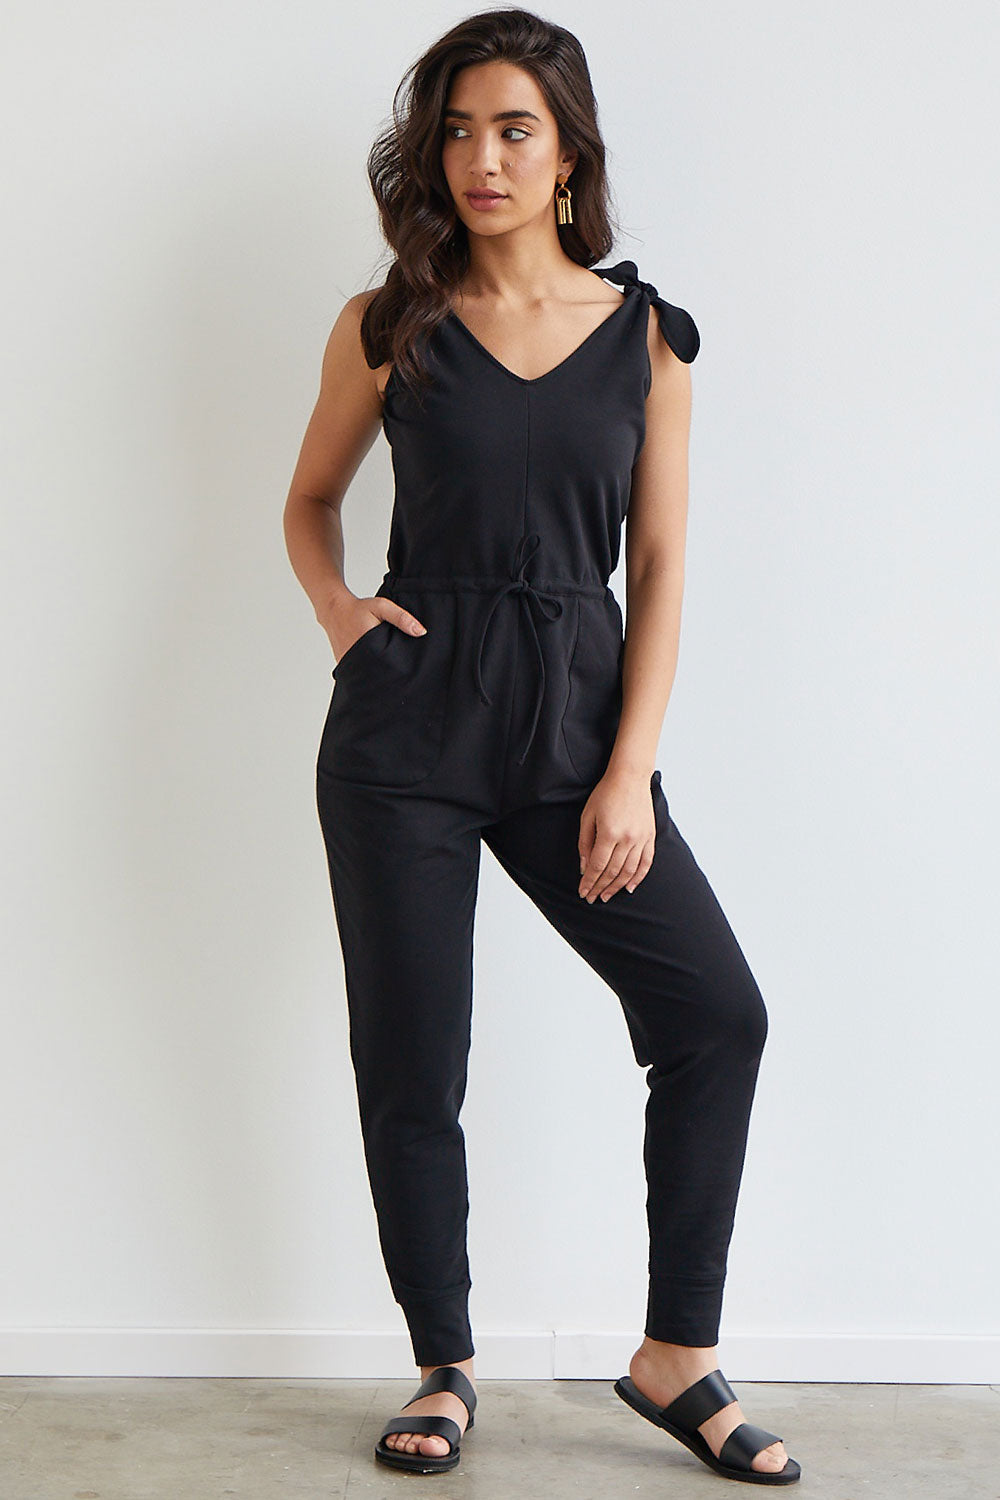 Best jumpsuits for tall women to shop in 2023